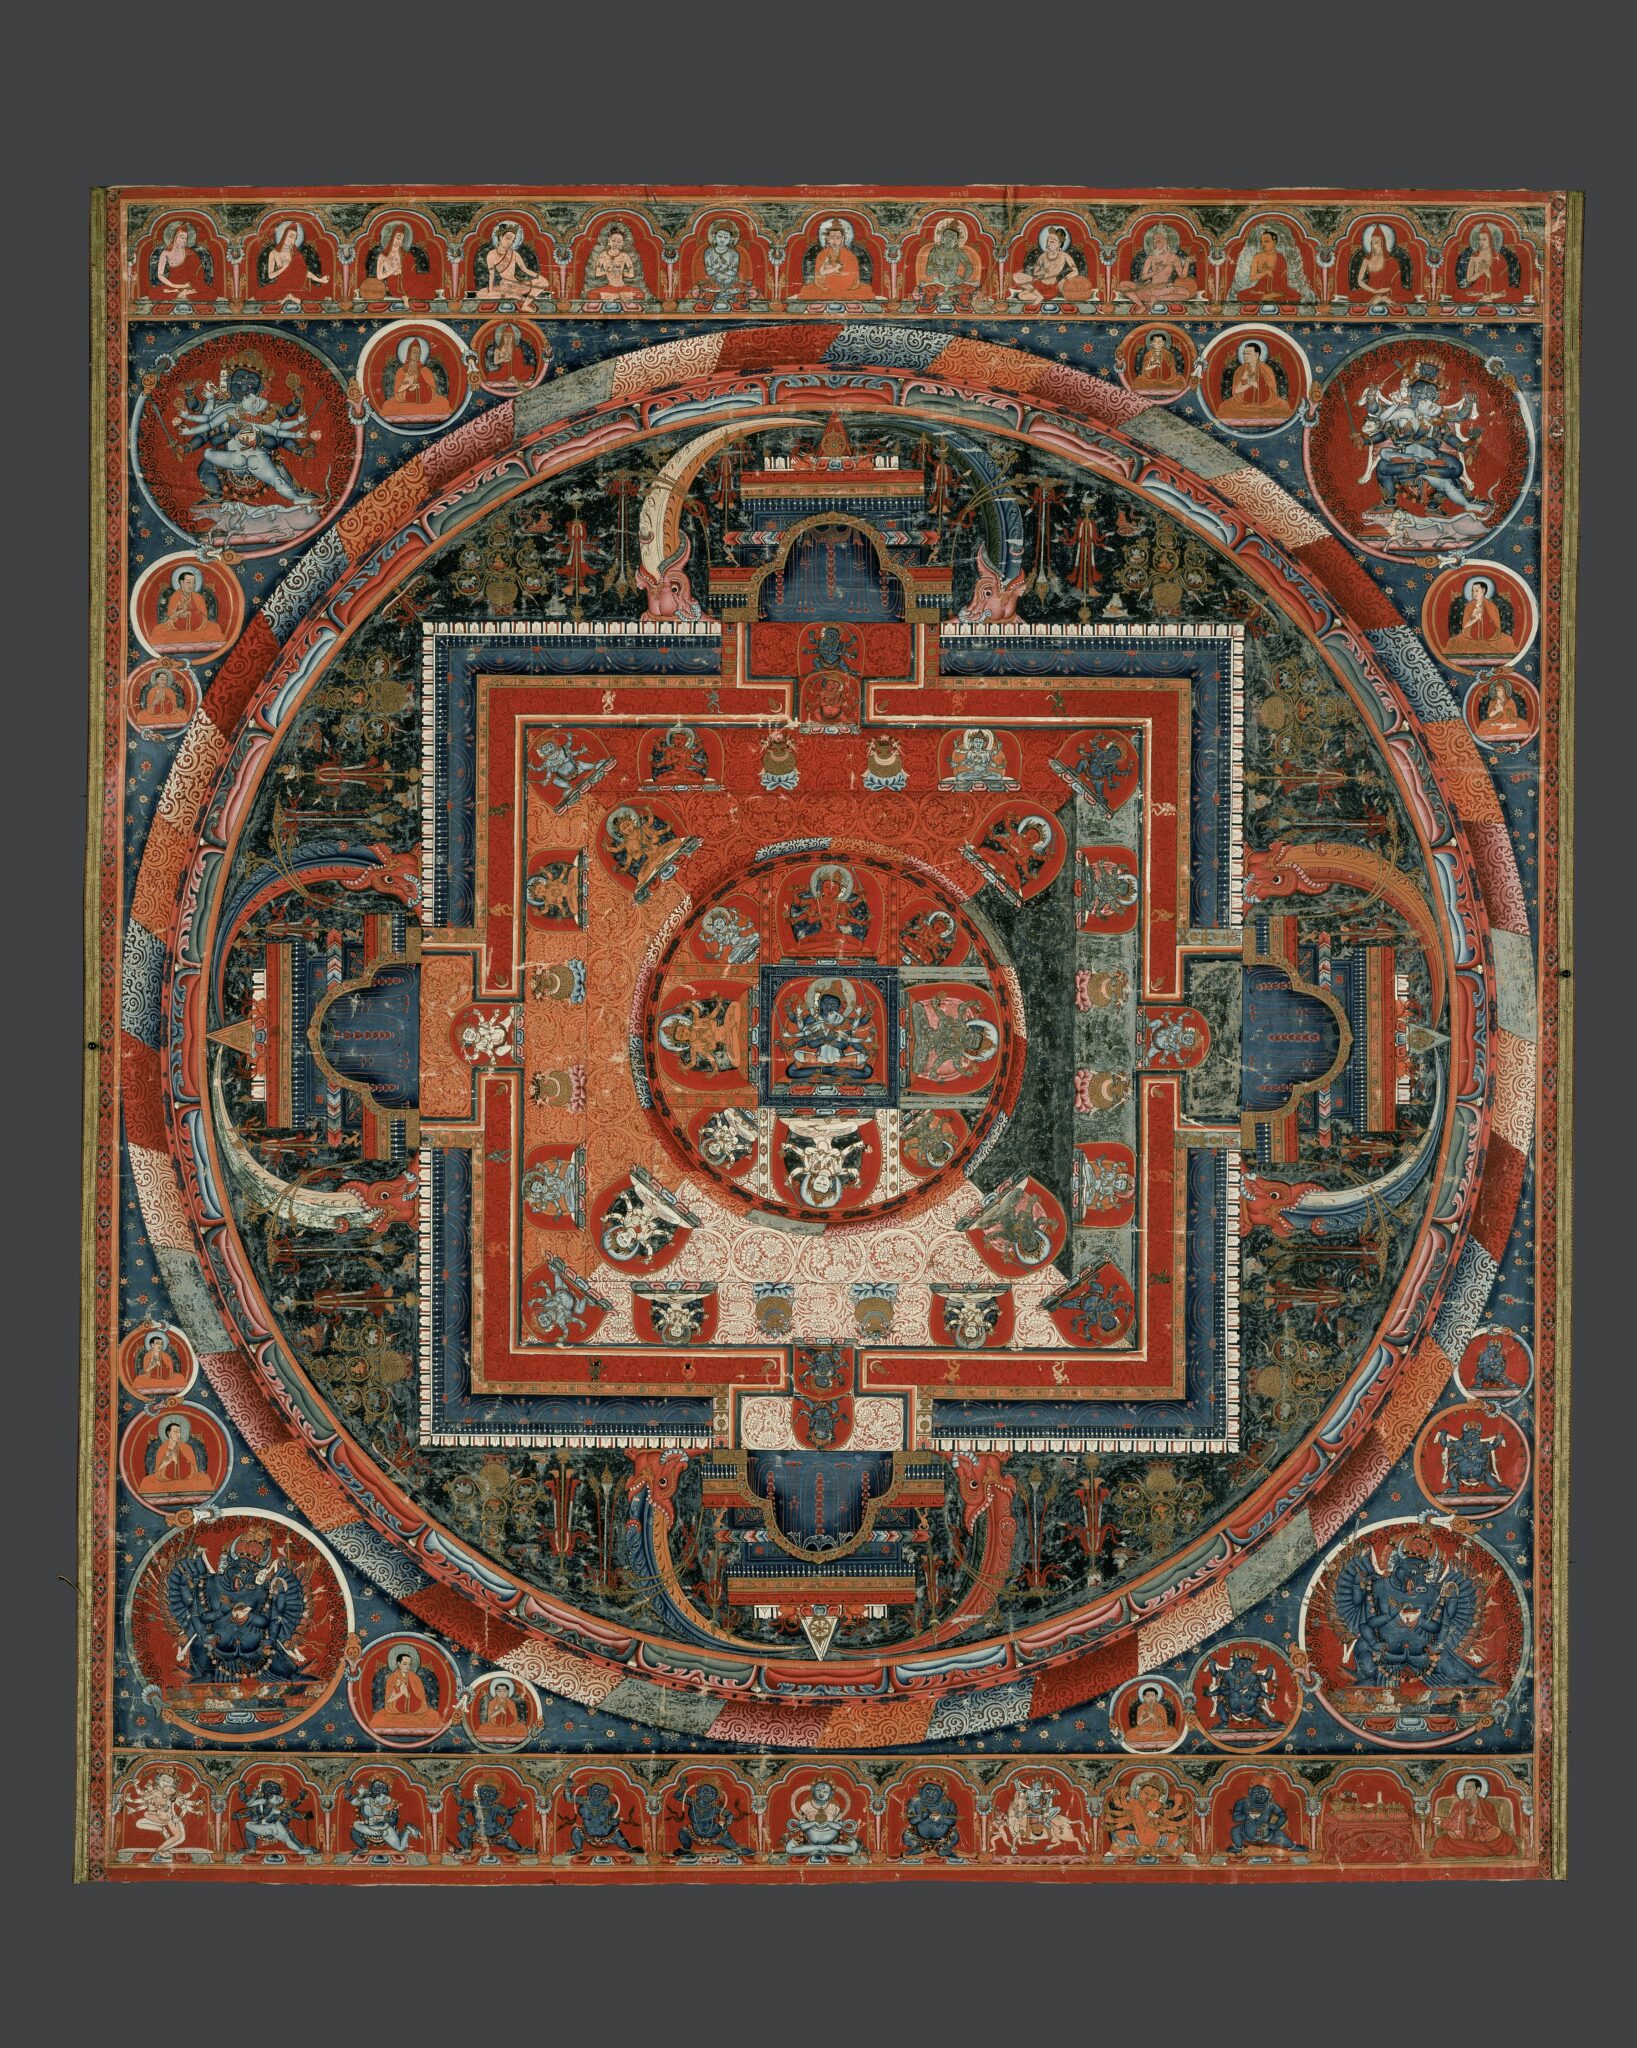 Mandala in jewel tones featuring richly ornamented green field between inner square and outer circles